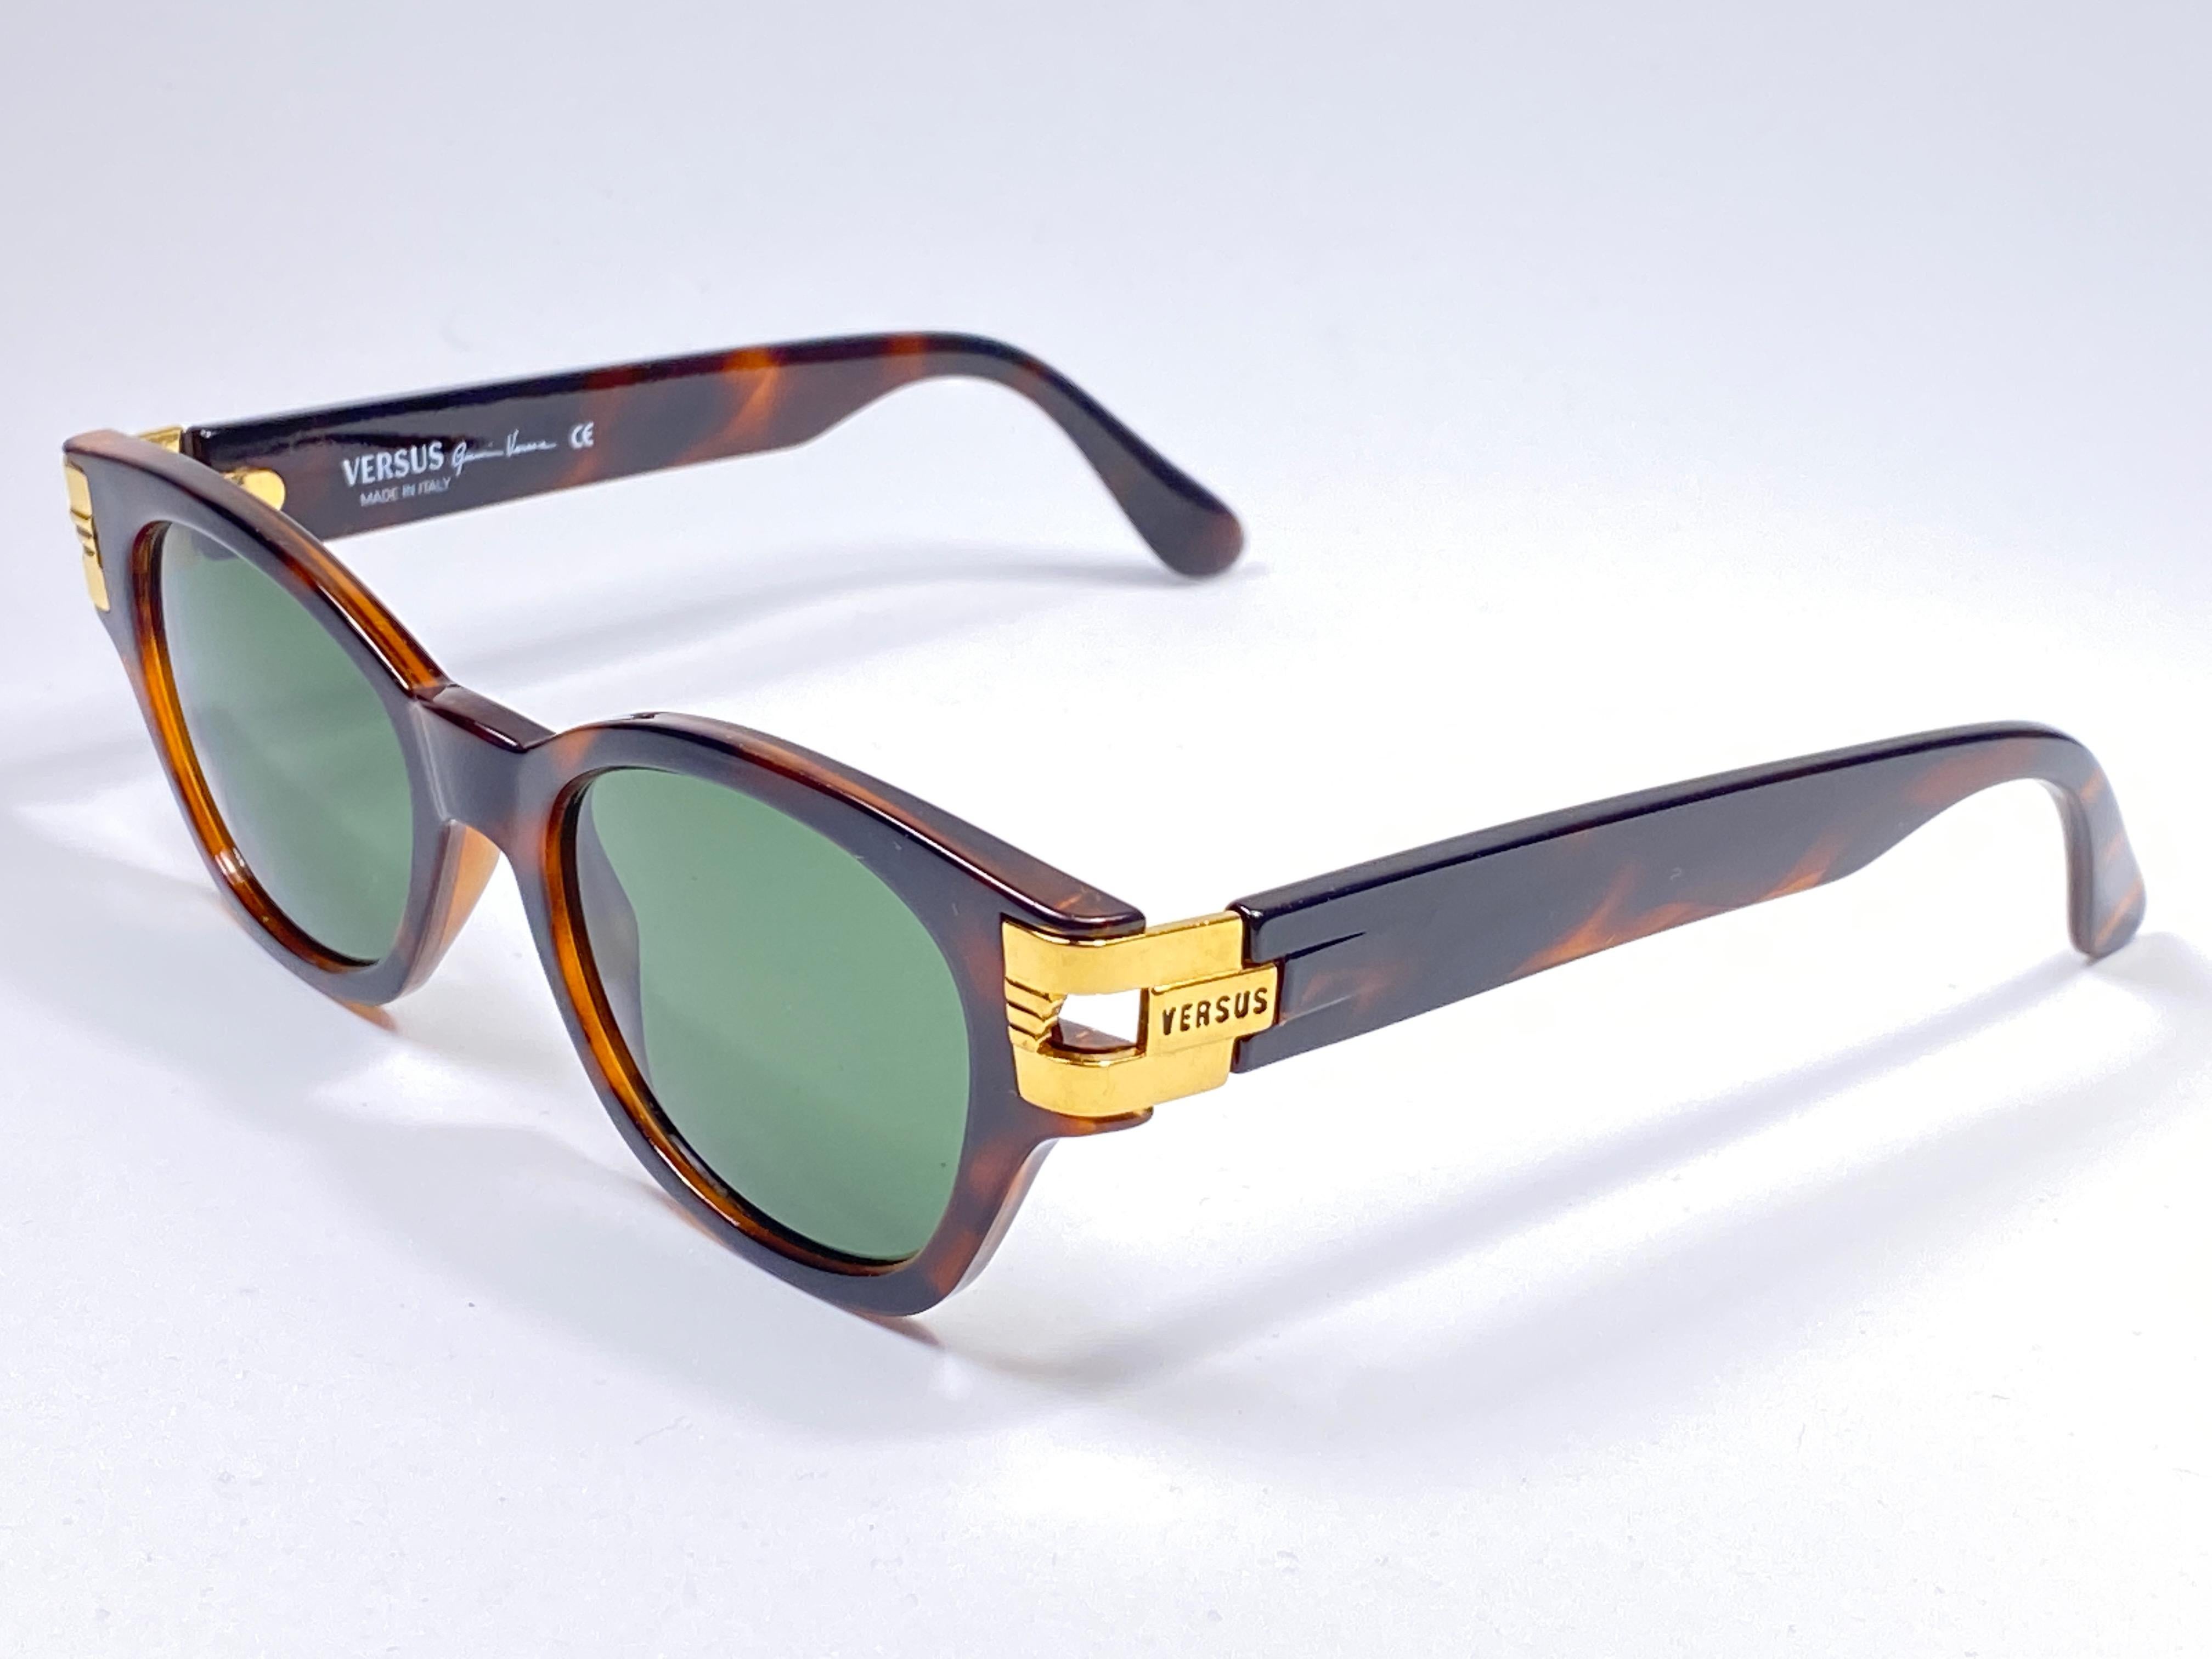 Mint Vintage Gianni Versace sleek black warfare style frame with medium brown lenses.

This pair could show minor sign of wear due to storage.

Made in italy.